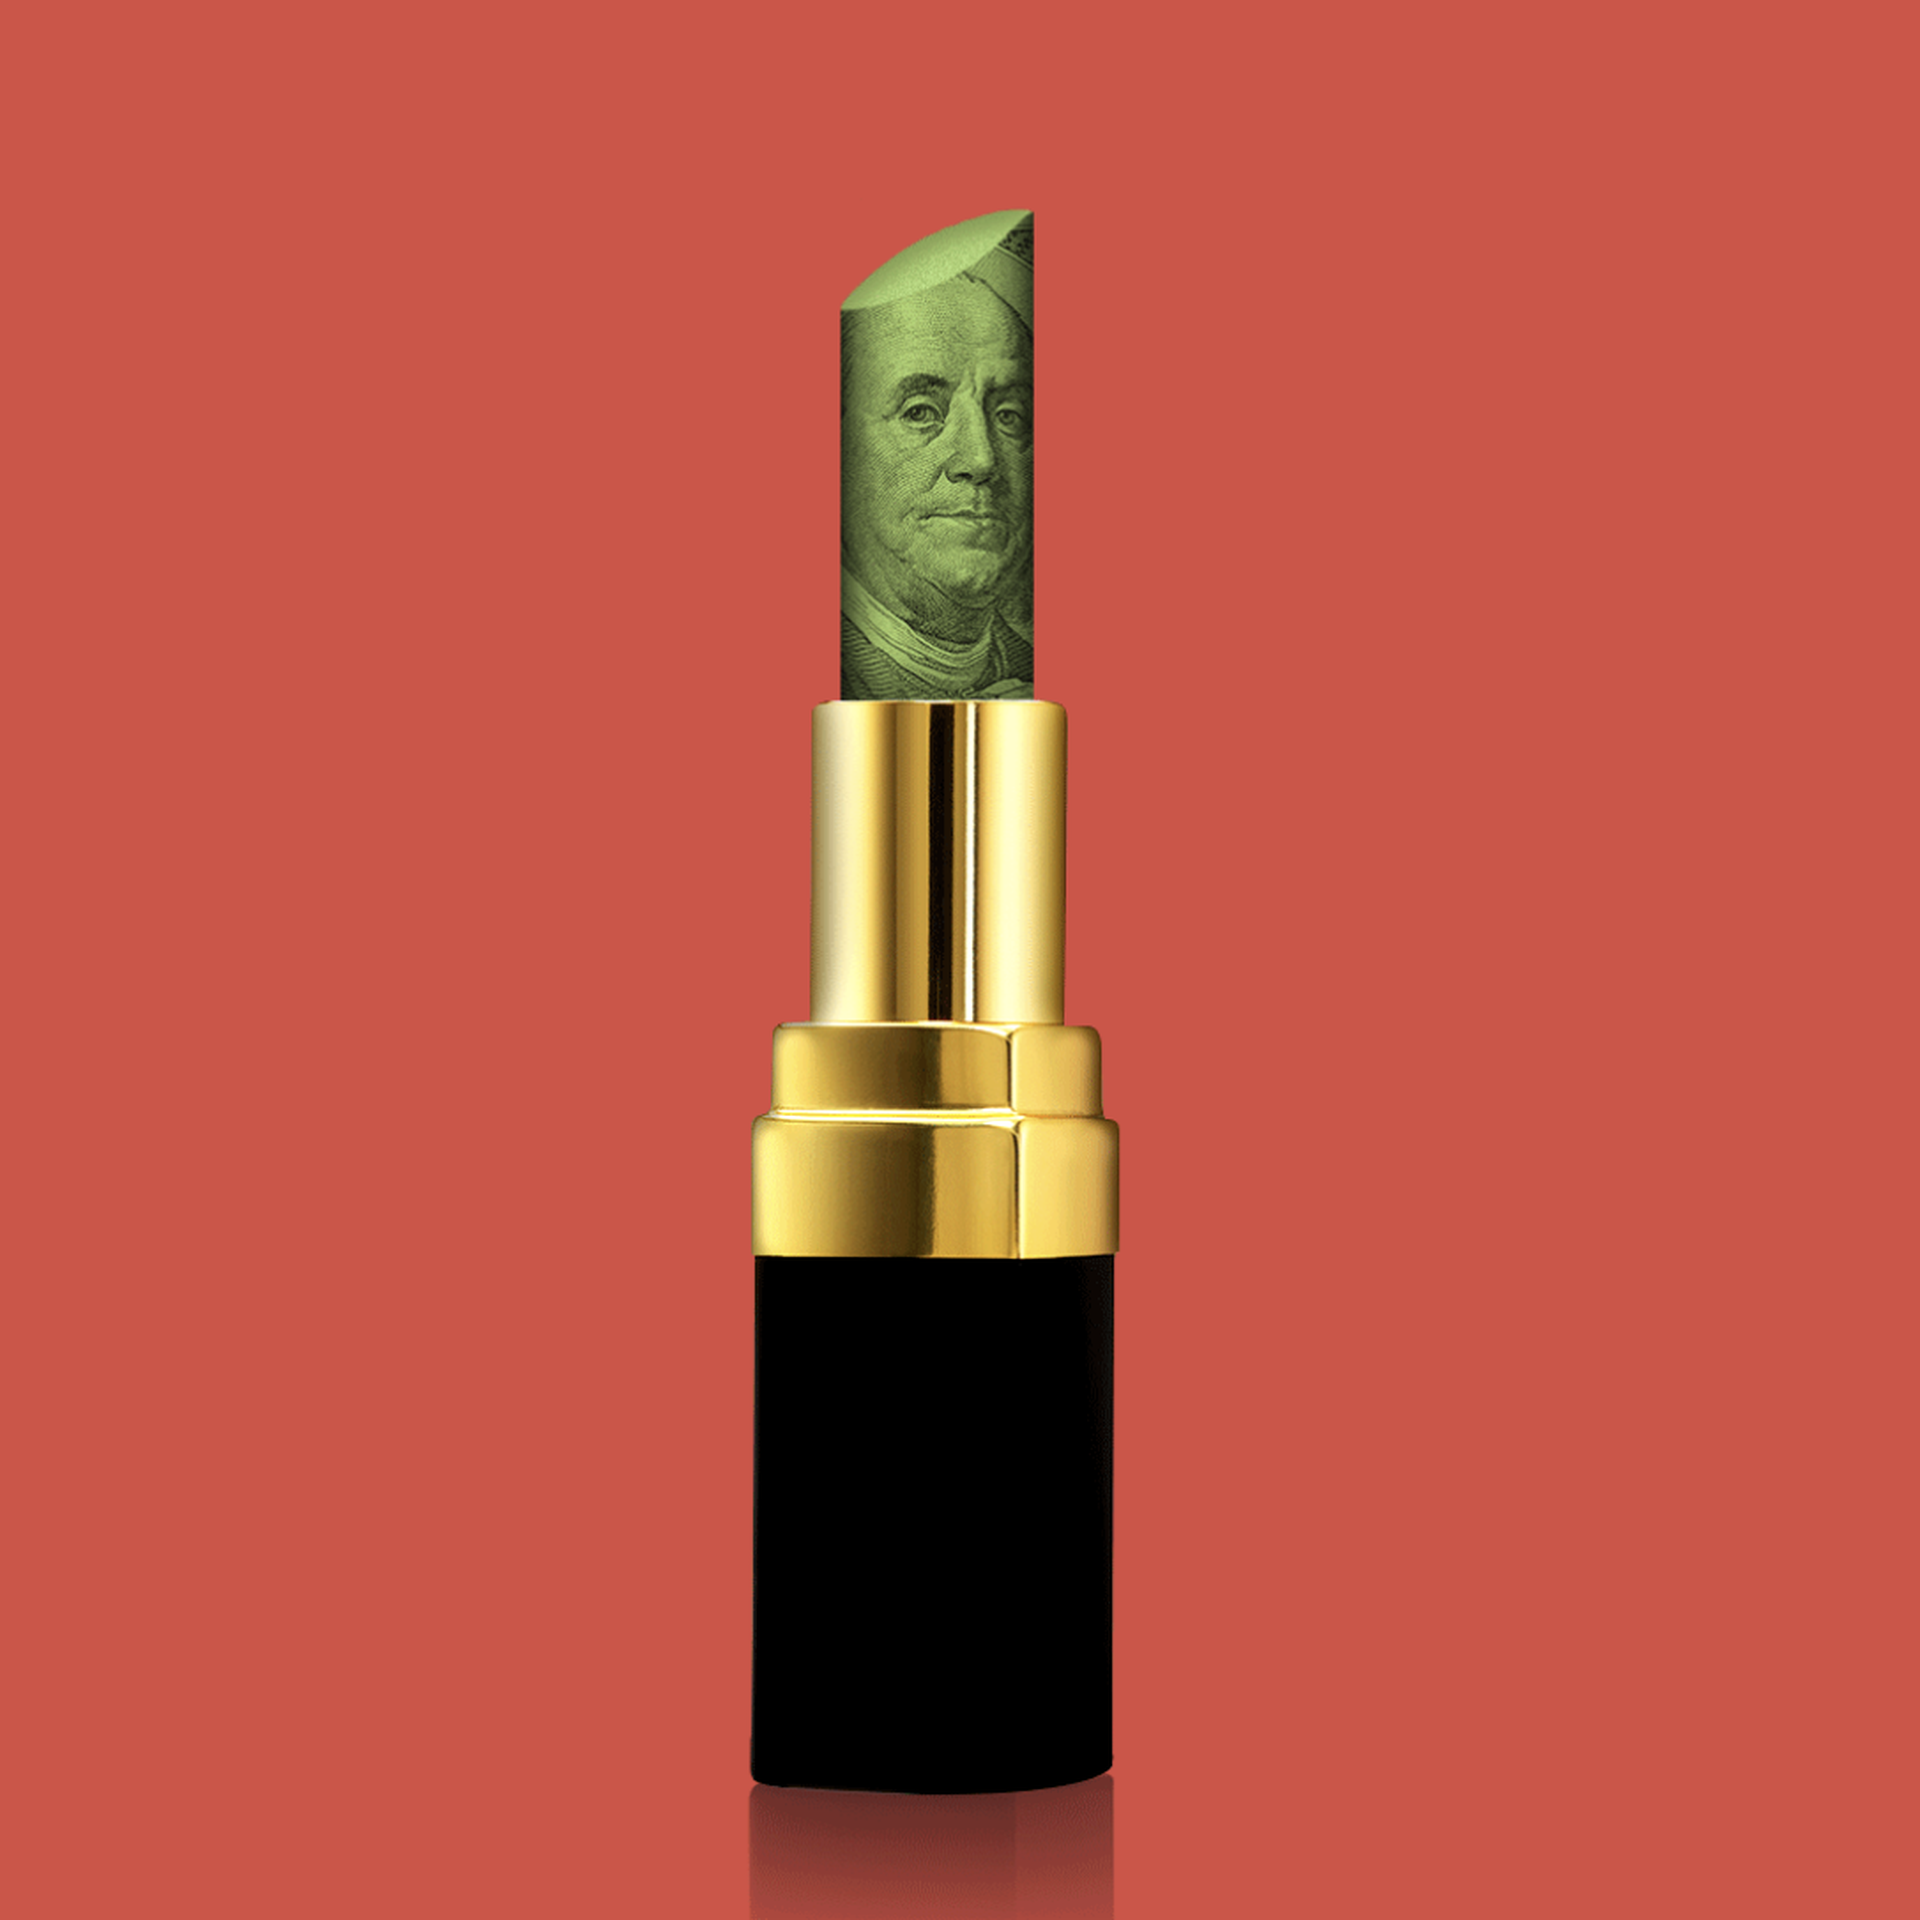 An illustration of a hundred-dollar bill in a lipstick container.